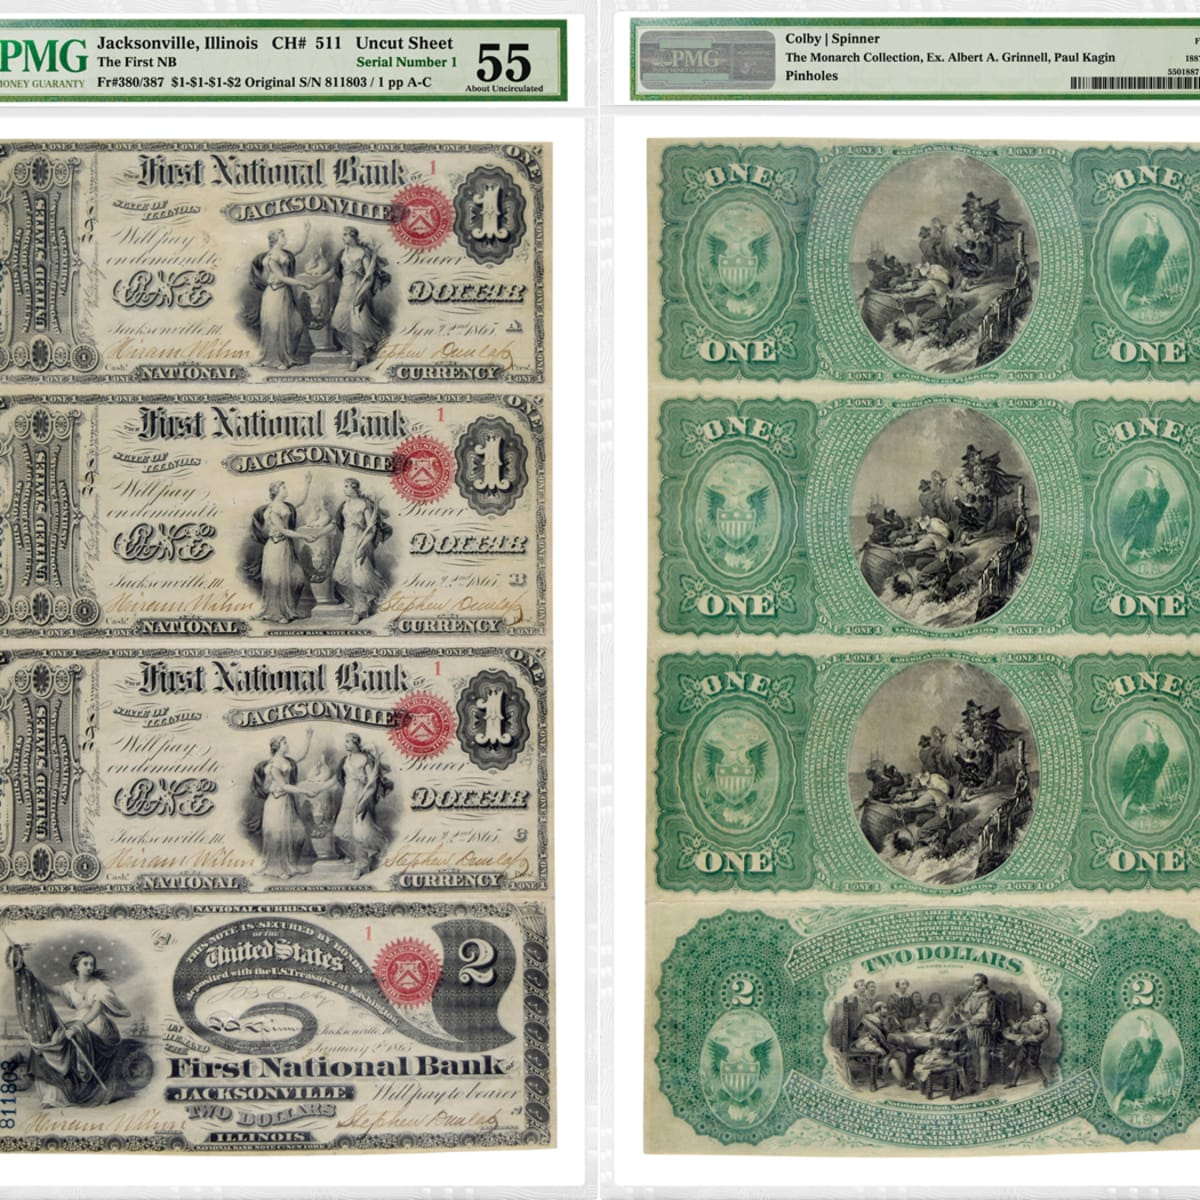 Details about   Copy 1966 Red Seal $1,000-$100k  Uncut Reproduction Currency Money Sheet Fantasy